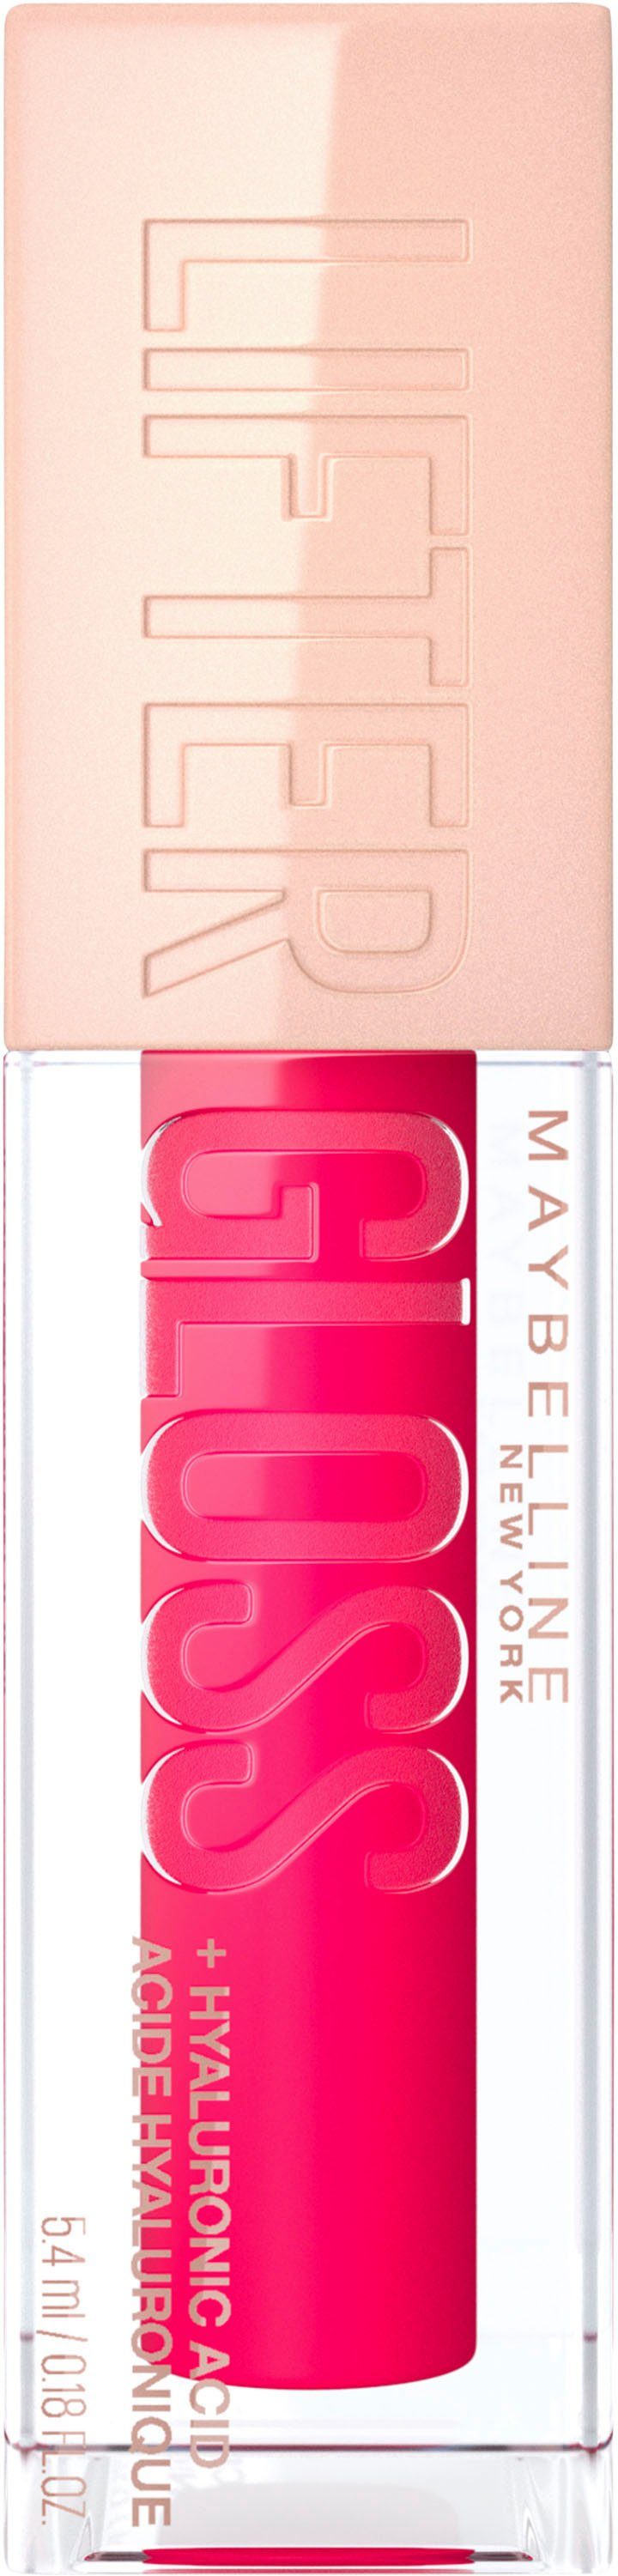 York Gloss Lipgloss Lifter New MAYBELLINE Maybelline YORK NEW